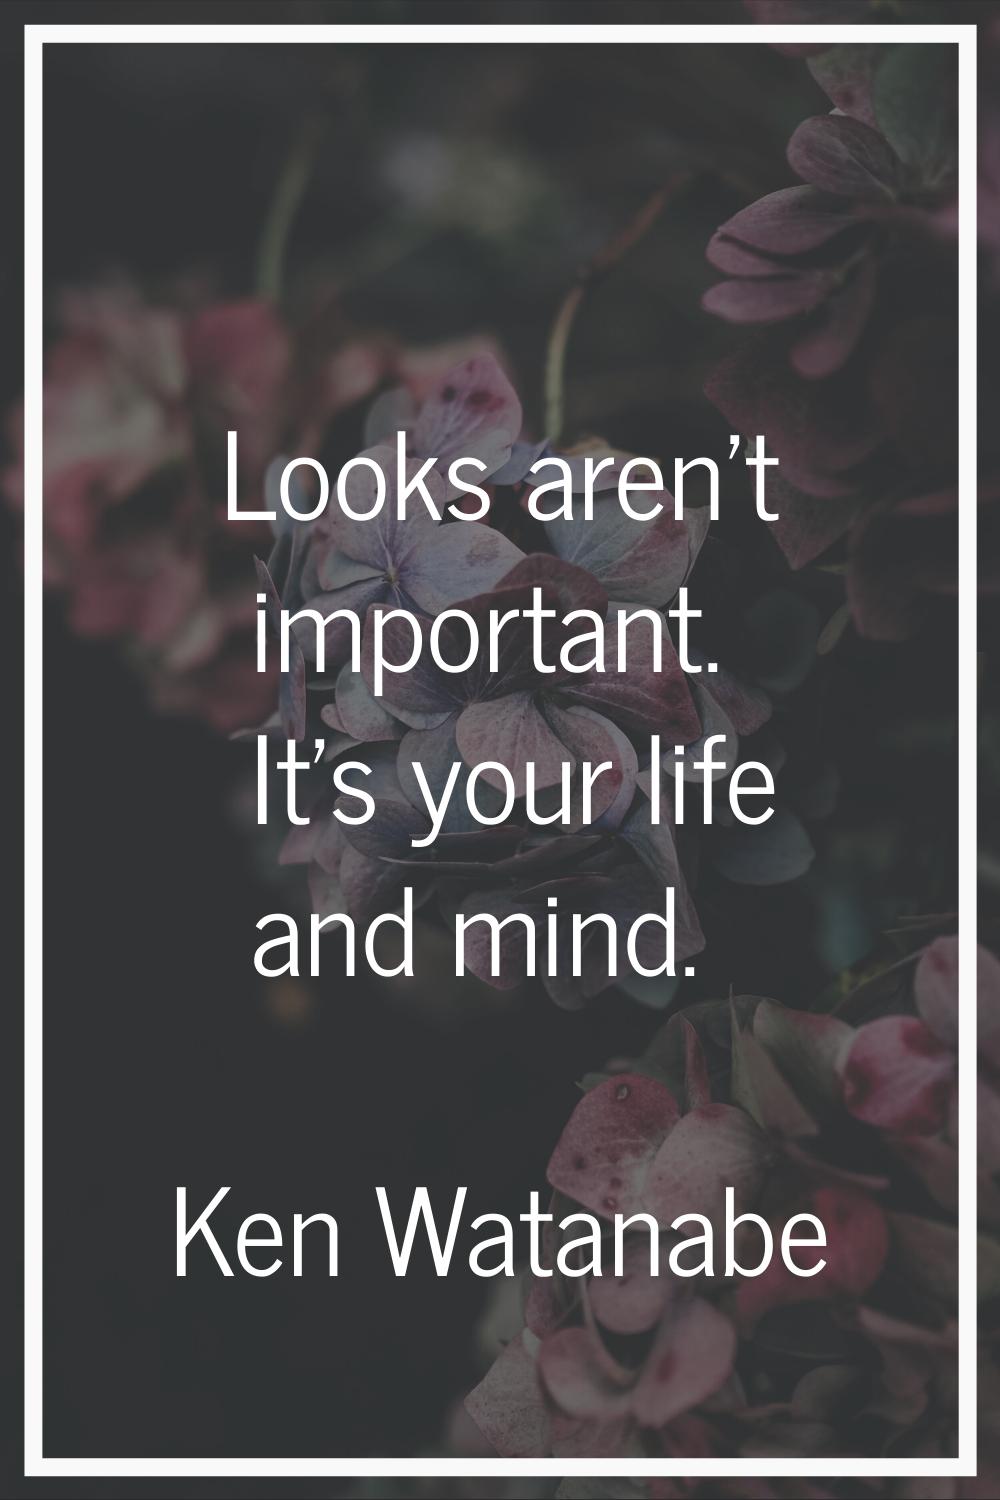 Looks aren't important. It's your life and mind.